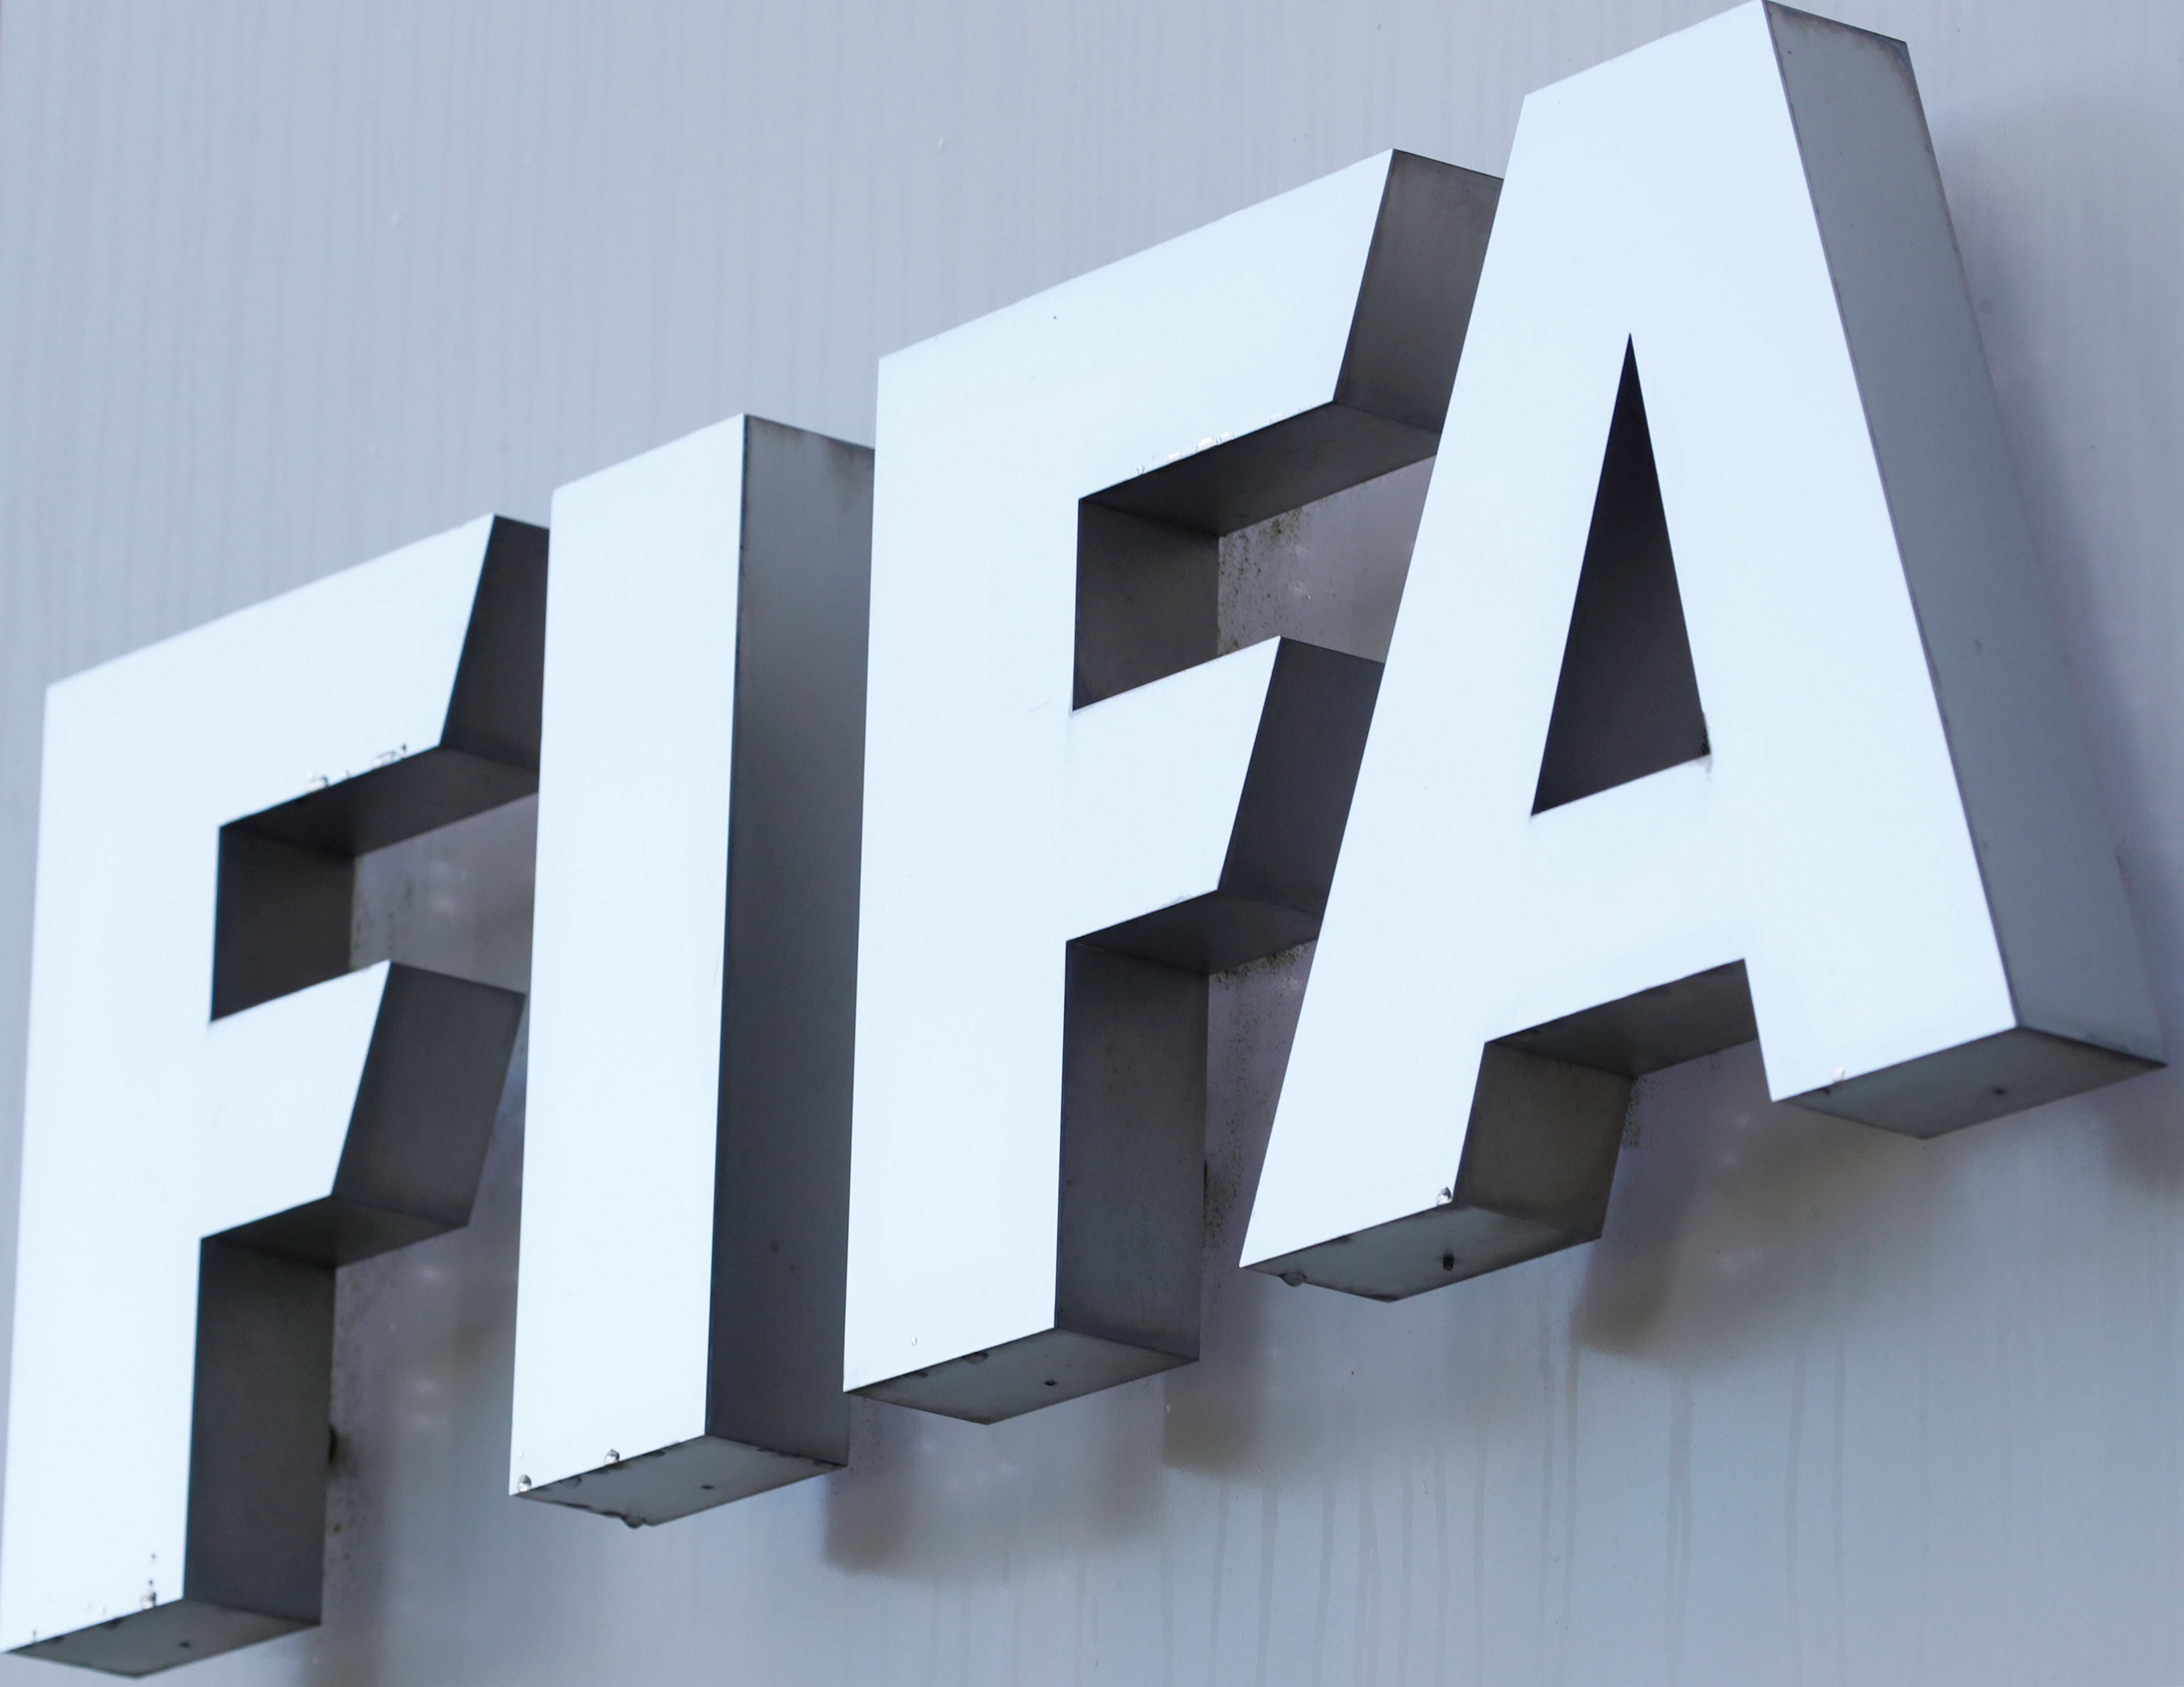 FIFA's logo is seen in front of its headquarters in Zurich